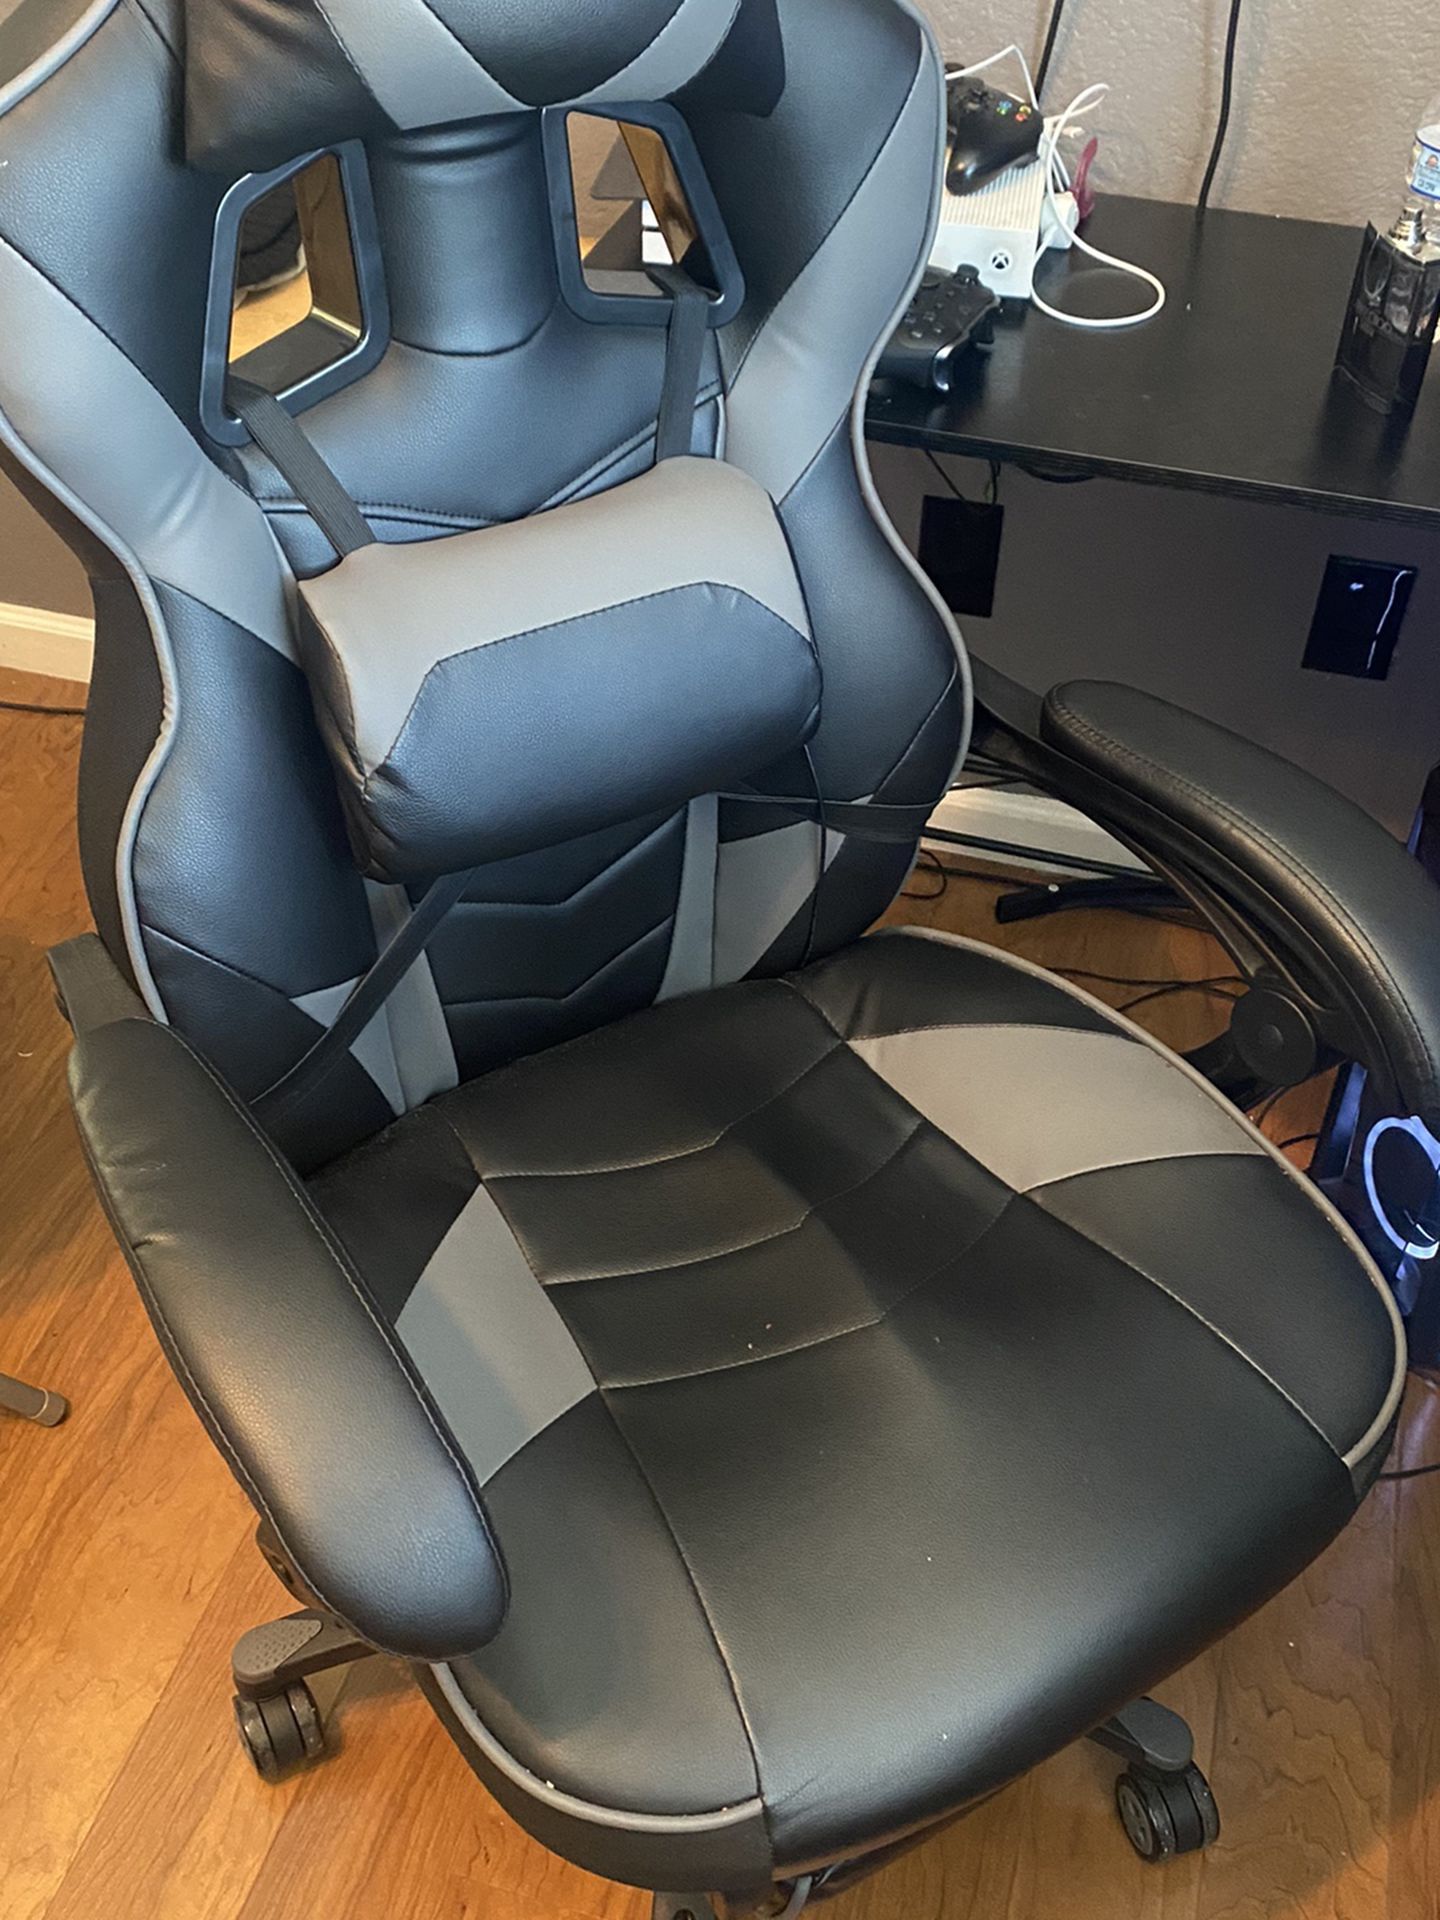 Gaming Chair W/Massager And Leg Extension!